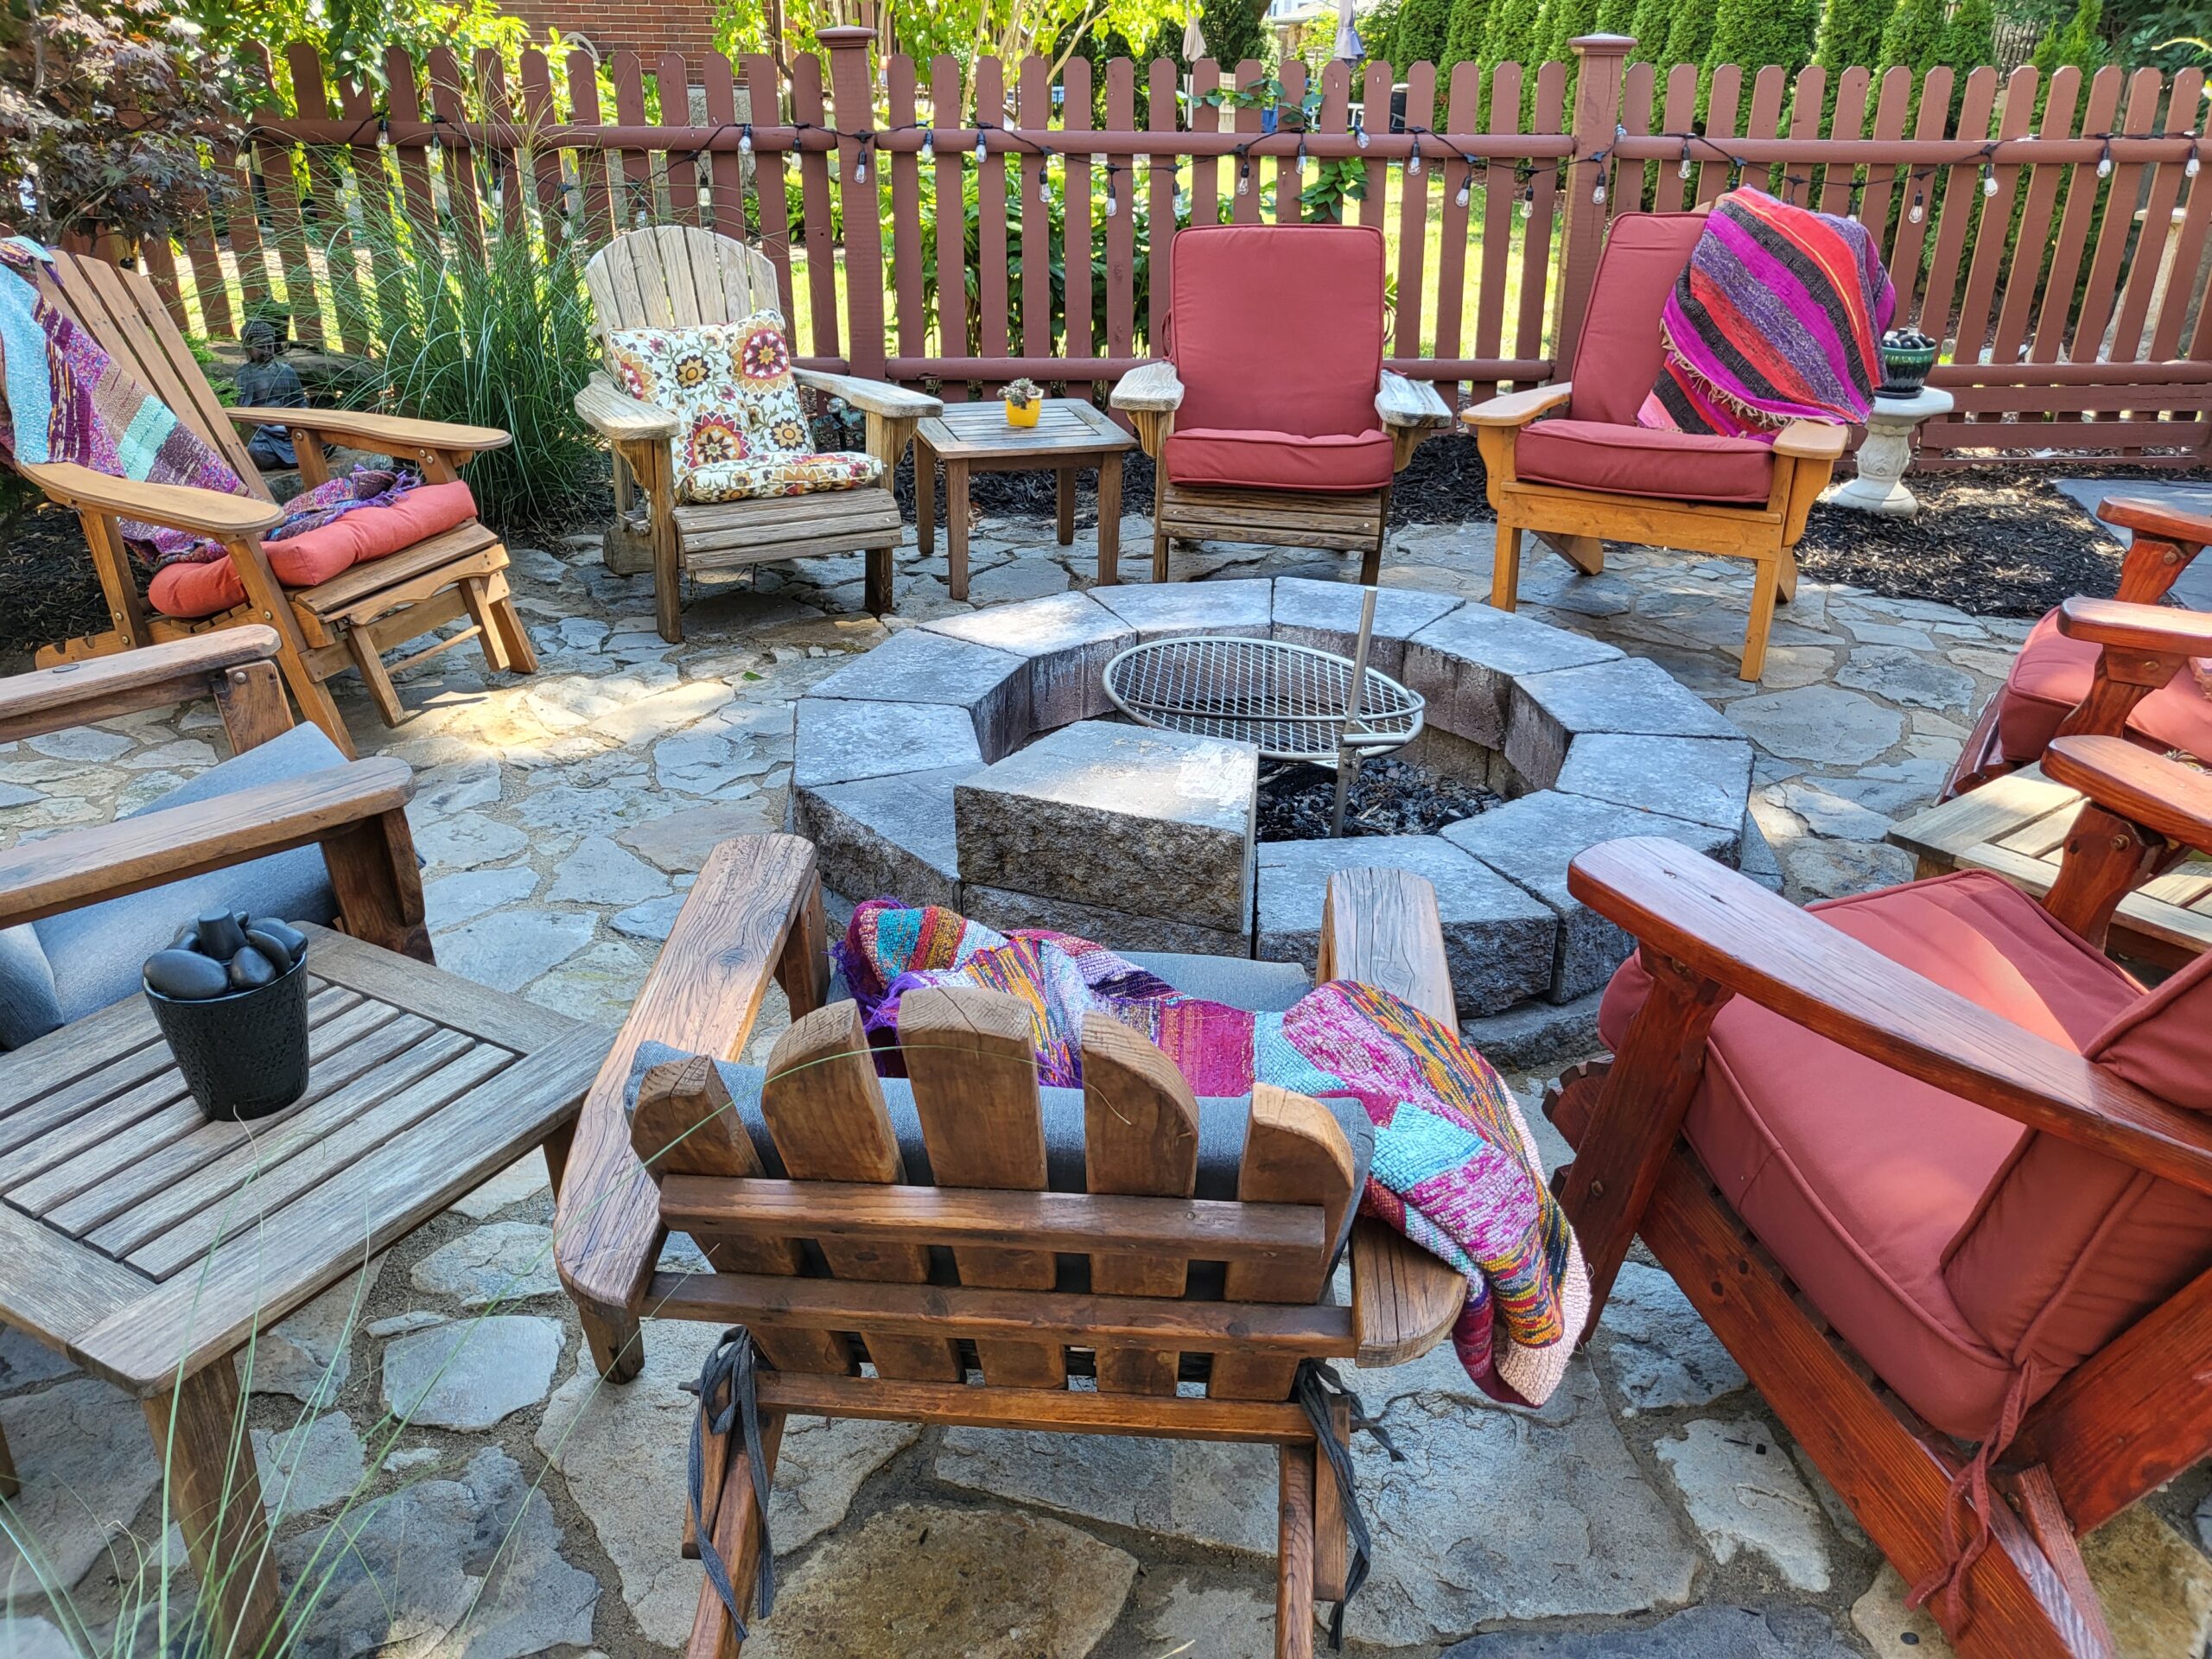 A DIY patio design showcasing an inviting fire pit, surrounded by multicolored stones stained to resemble slate, creating a warm and welcoming outdoor space.